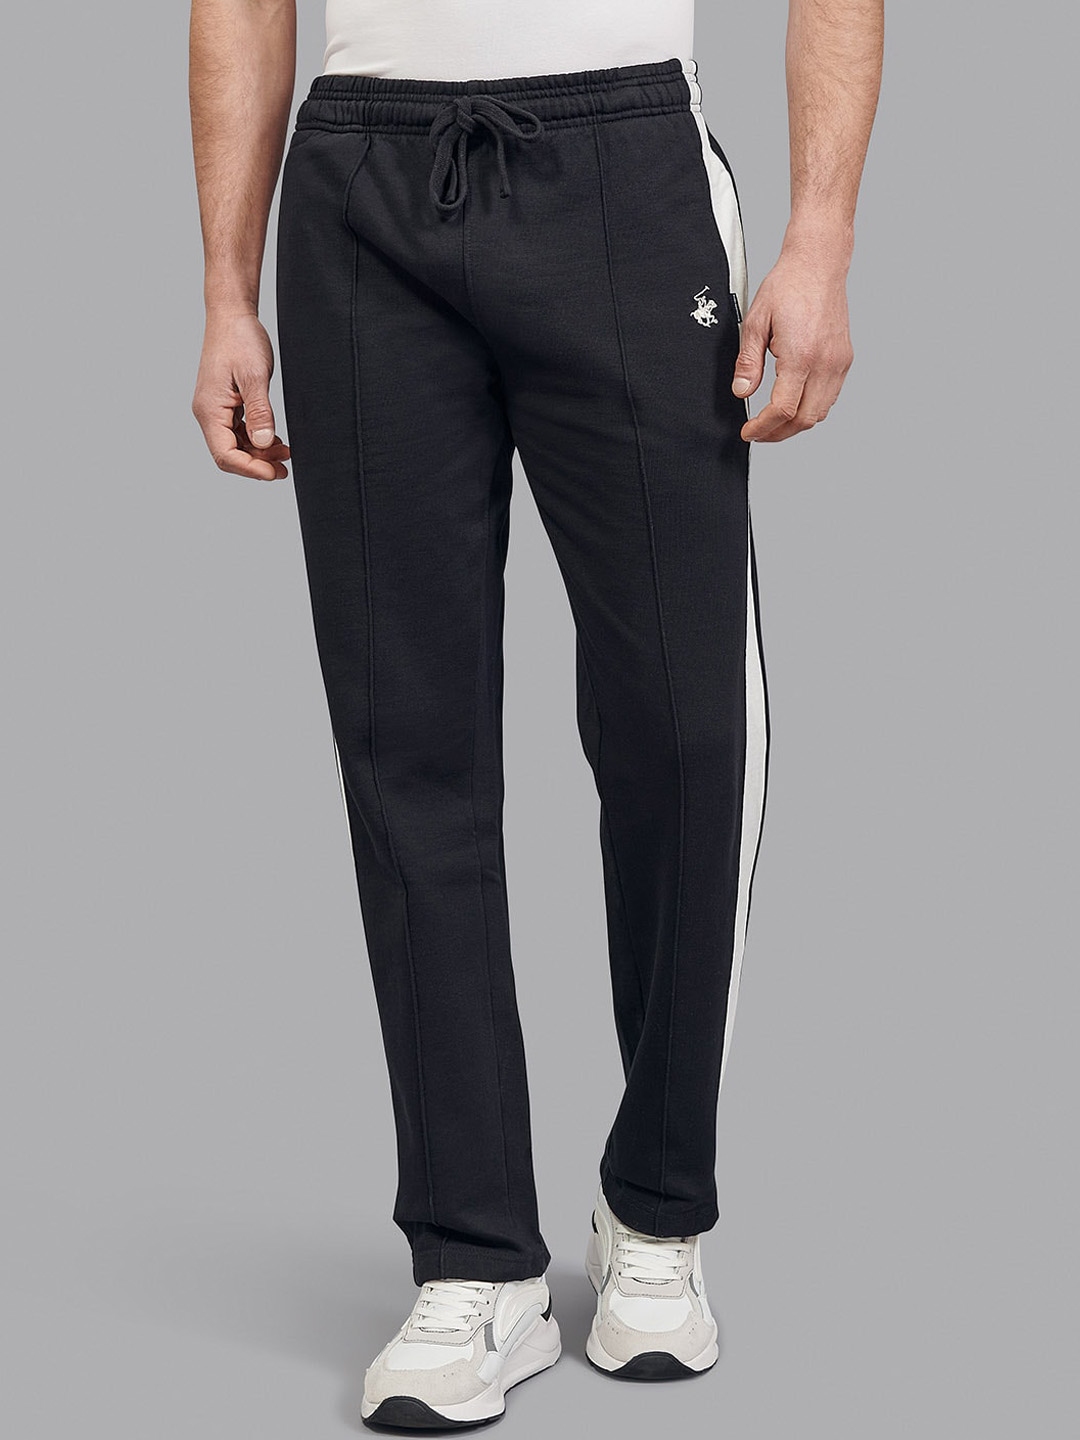 Buy Beverly Hills Polo Club Men Black Solid Cotton Track Pants - Track ...